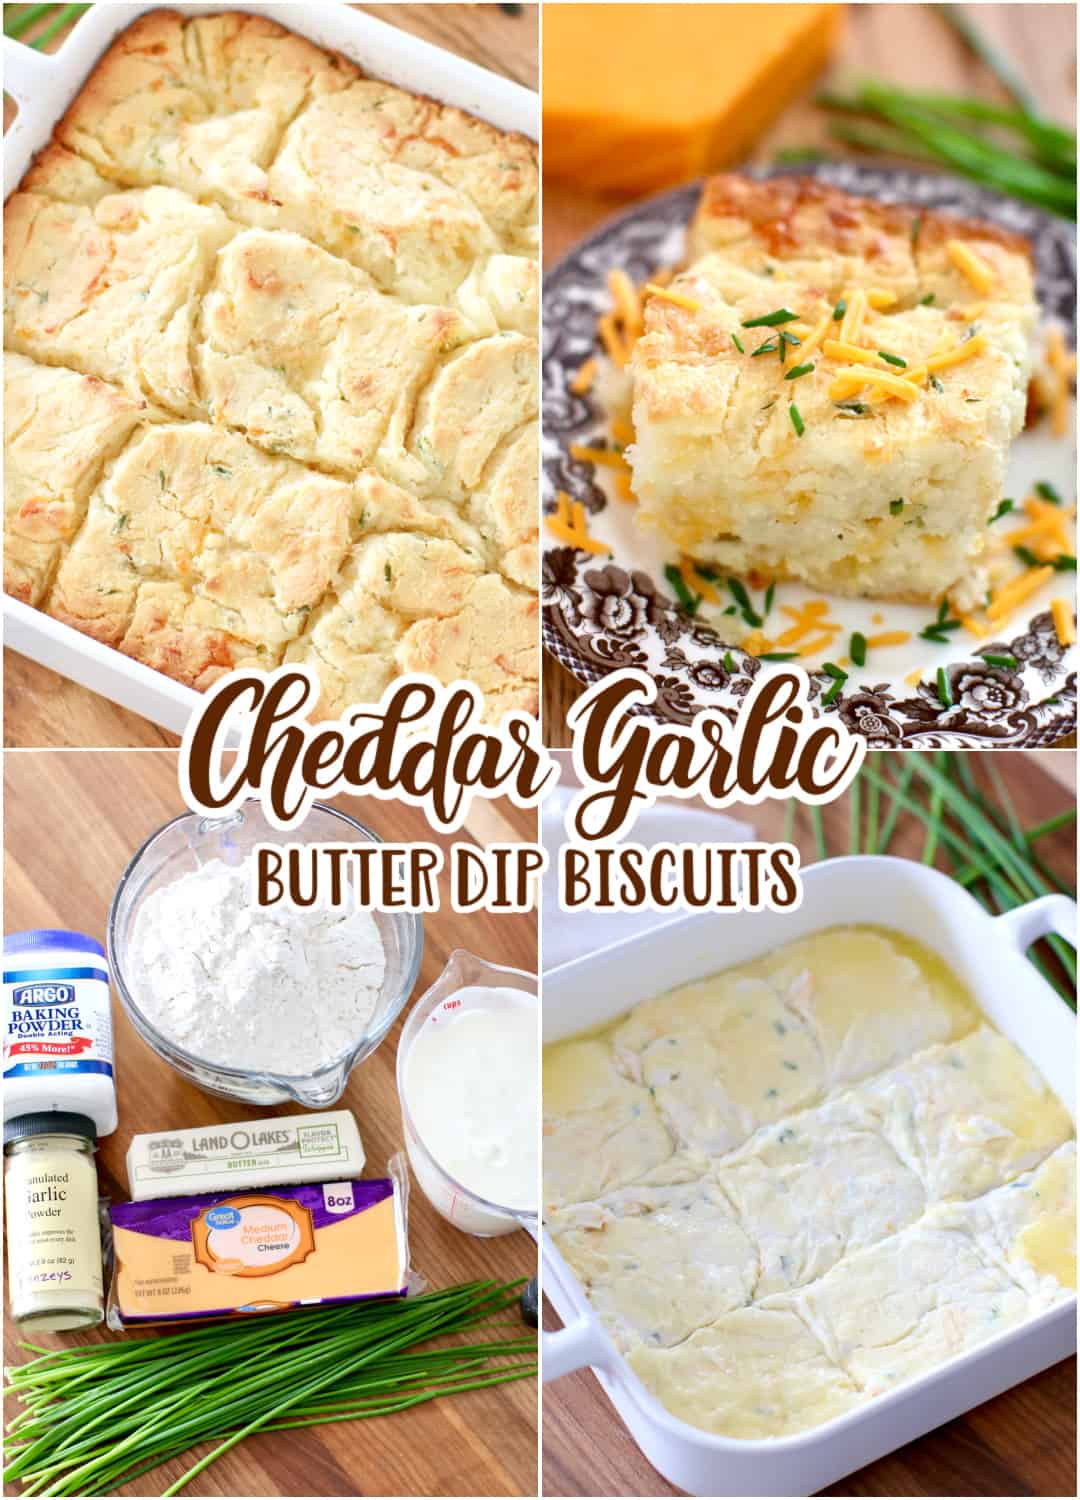 Photo collage with 4 photos of Cheddar Garlic Butter Dip Biscuits by The Country Cook - photo of the ingredients, photo of biscuits in white baking dish before baking, photo of biscuits after baking and a photo of a biscuit on a plate. 